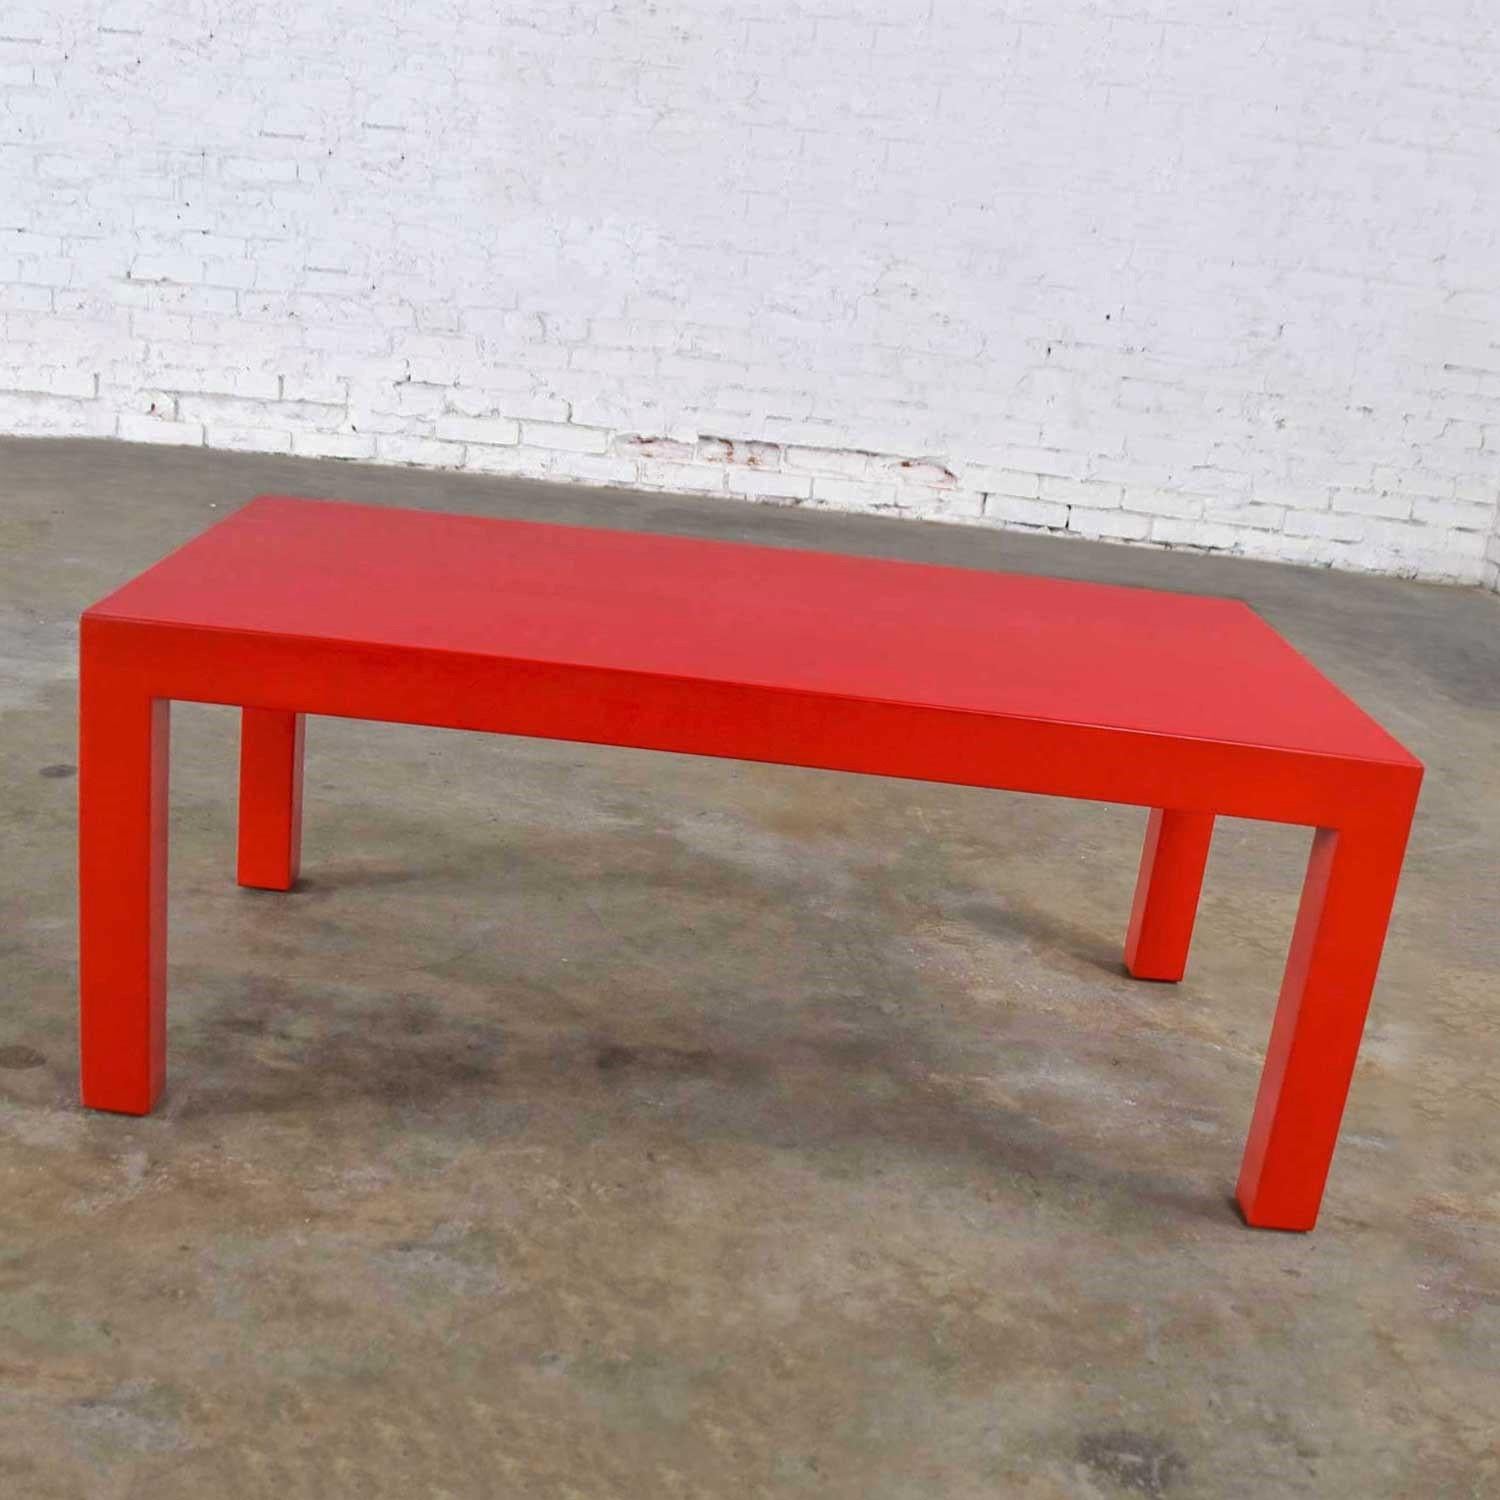 Stunning Mid-Century Modern Chinese red painted wood rectangle Parsons style coffee table. Wonderful vintage condition. Minor imperfections consistent with use. Please see photos, circa 1950s-1970s

Radiant, ravishing, and ready to be yours!!!